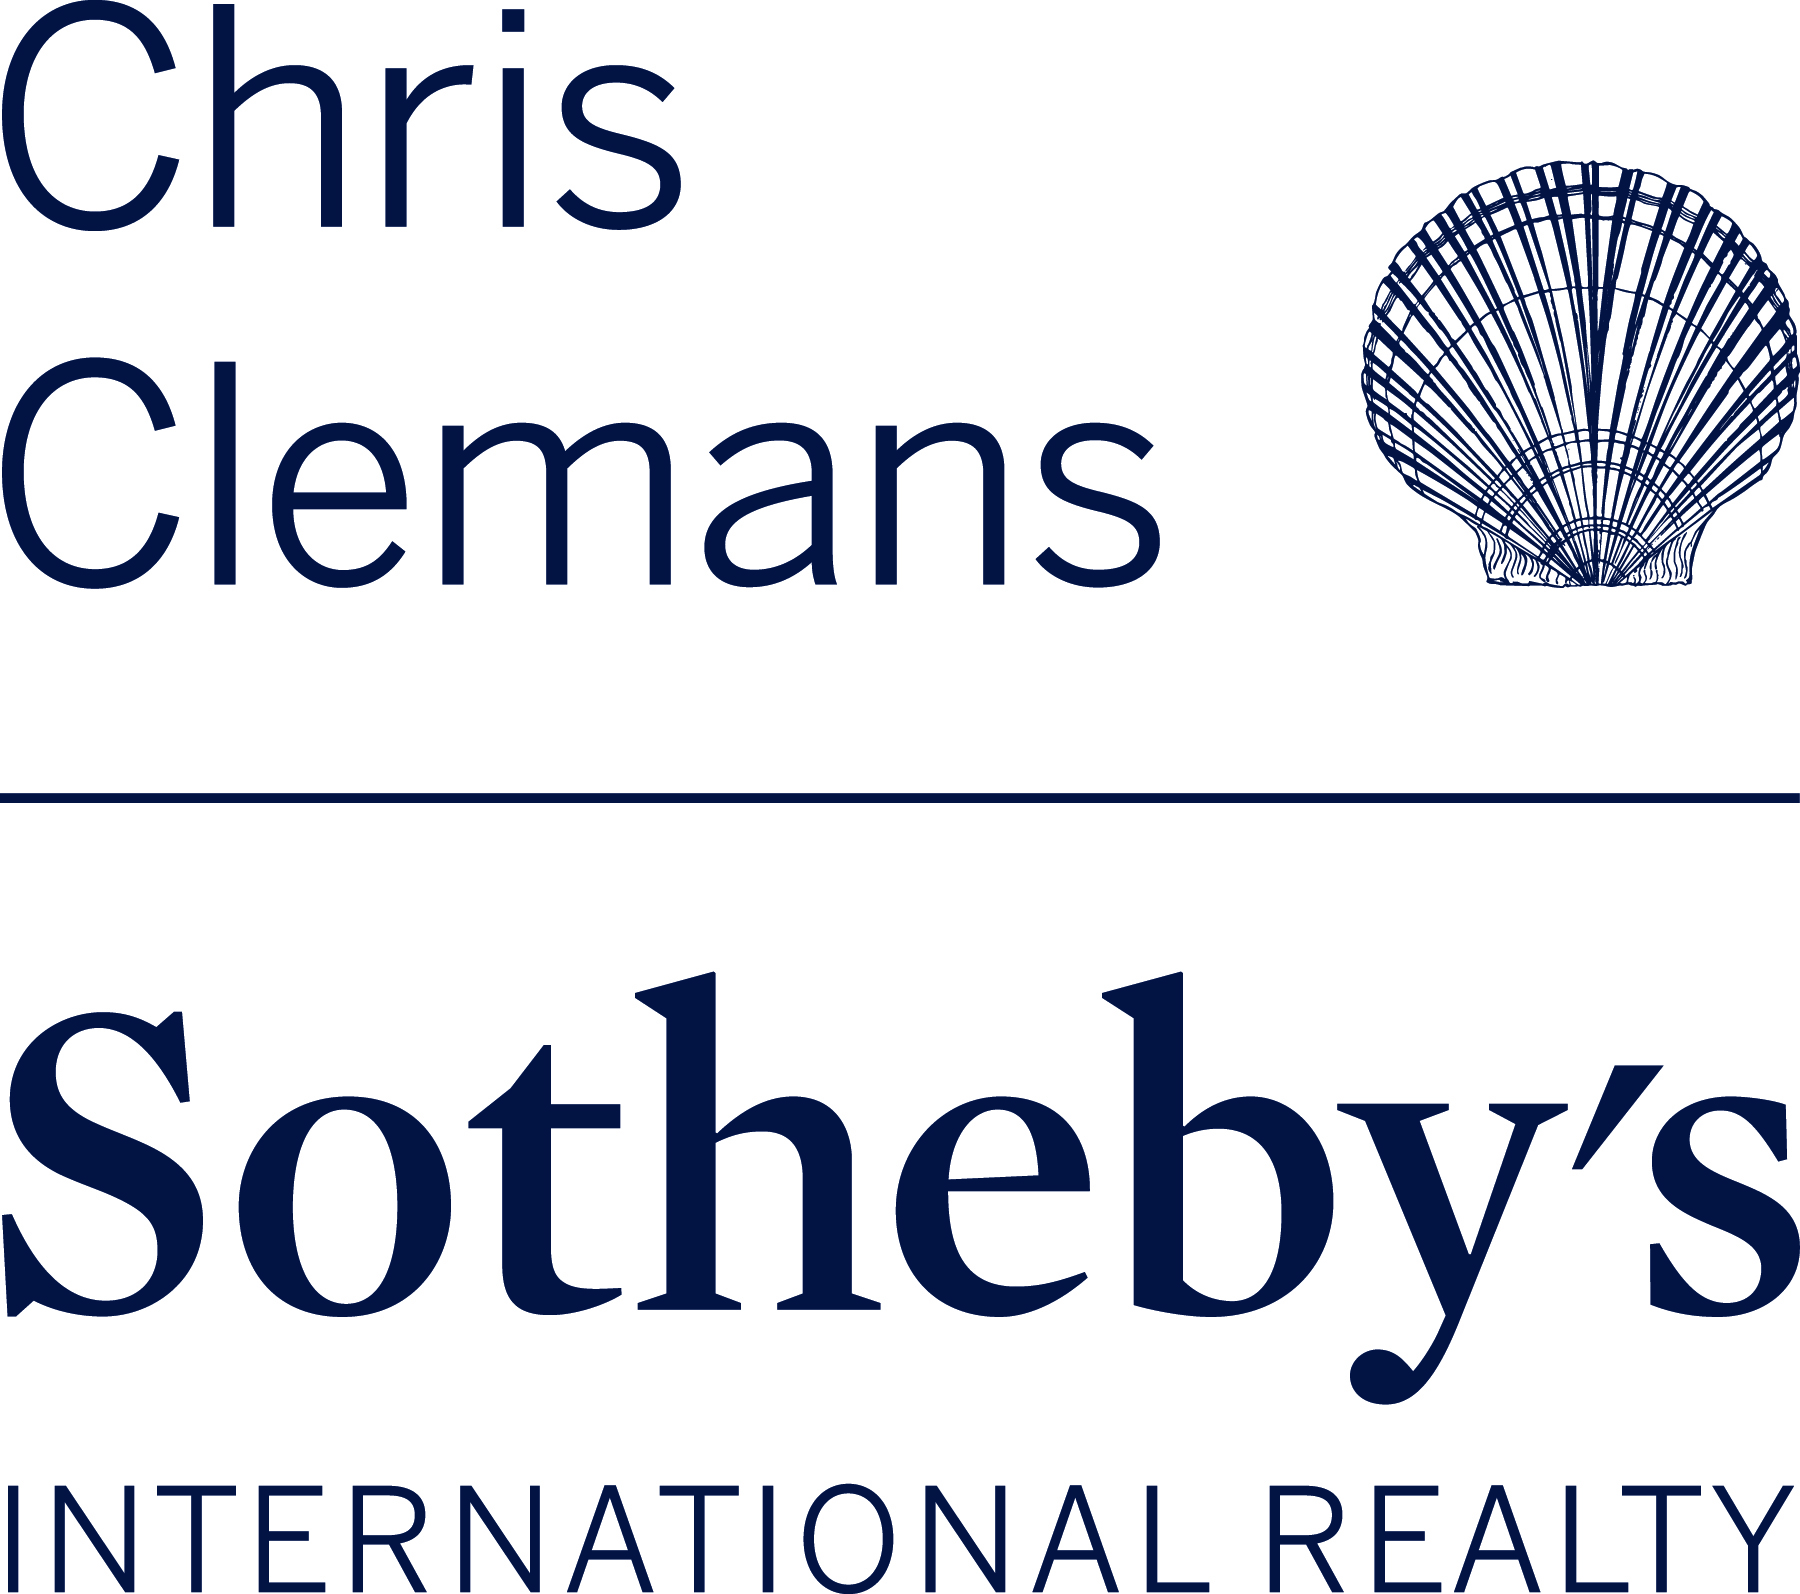 Chris Clemens and Sotheby's International Realty Logo